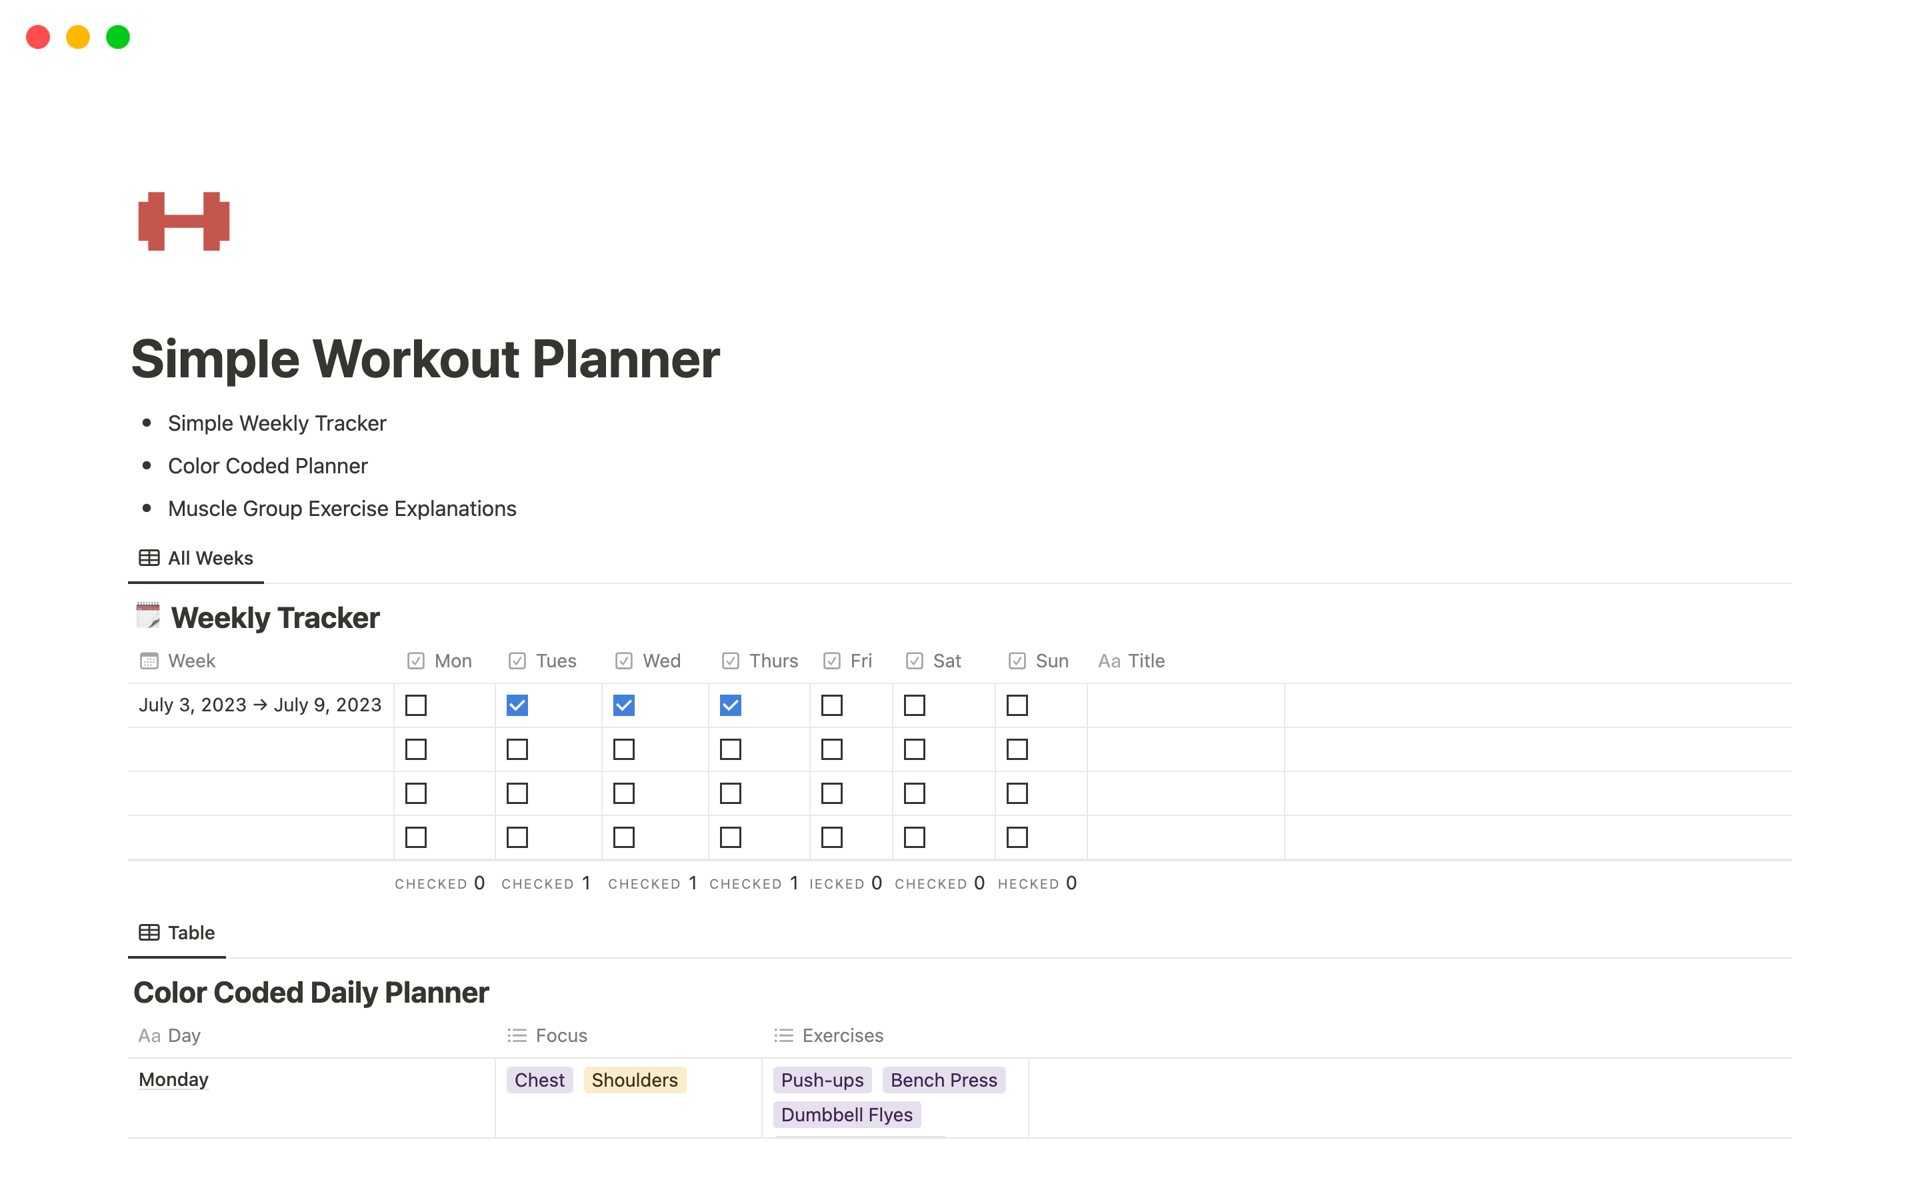 You'll get a weekly/daily workout tracker, a colour coded daily exercise planner, and a table of contents with workouts for main muscle groups and explanations.